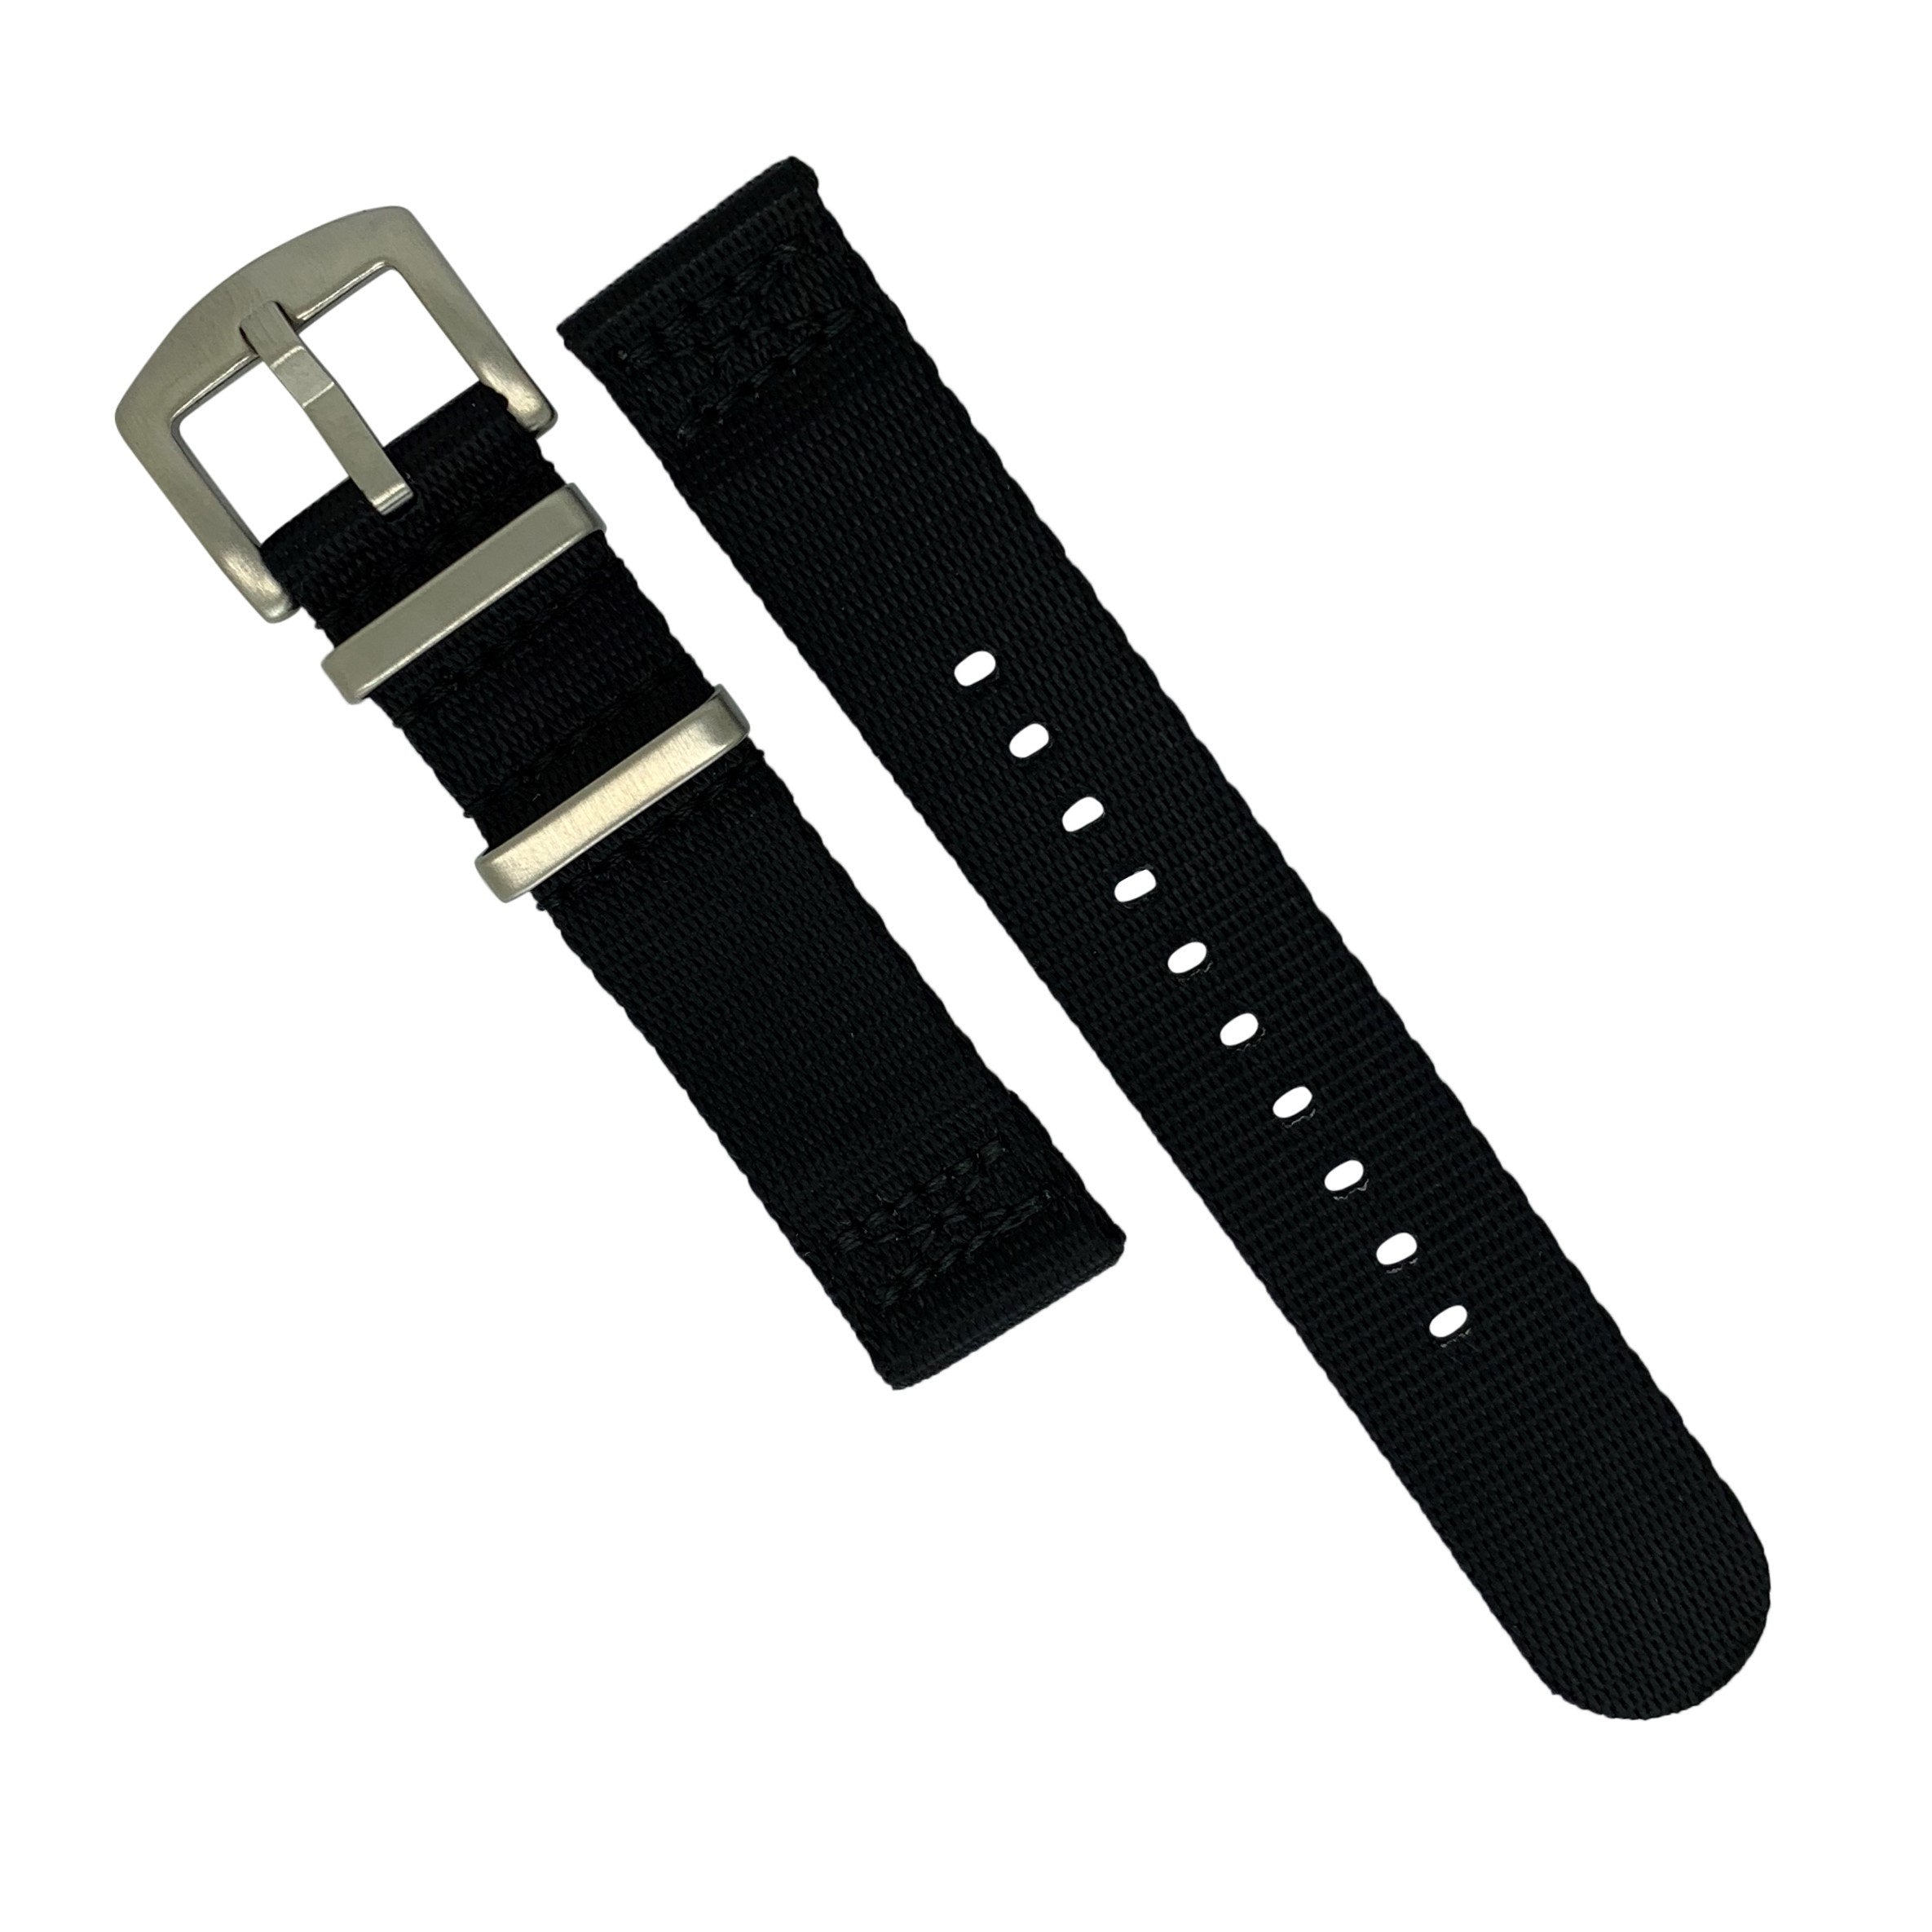 Two Piece Seat Belt Nato Strap in Black with Brushed Silver Buckle (20mm)